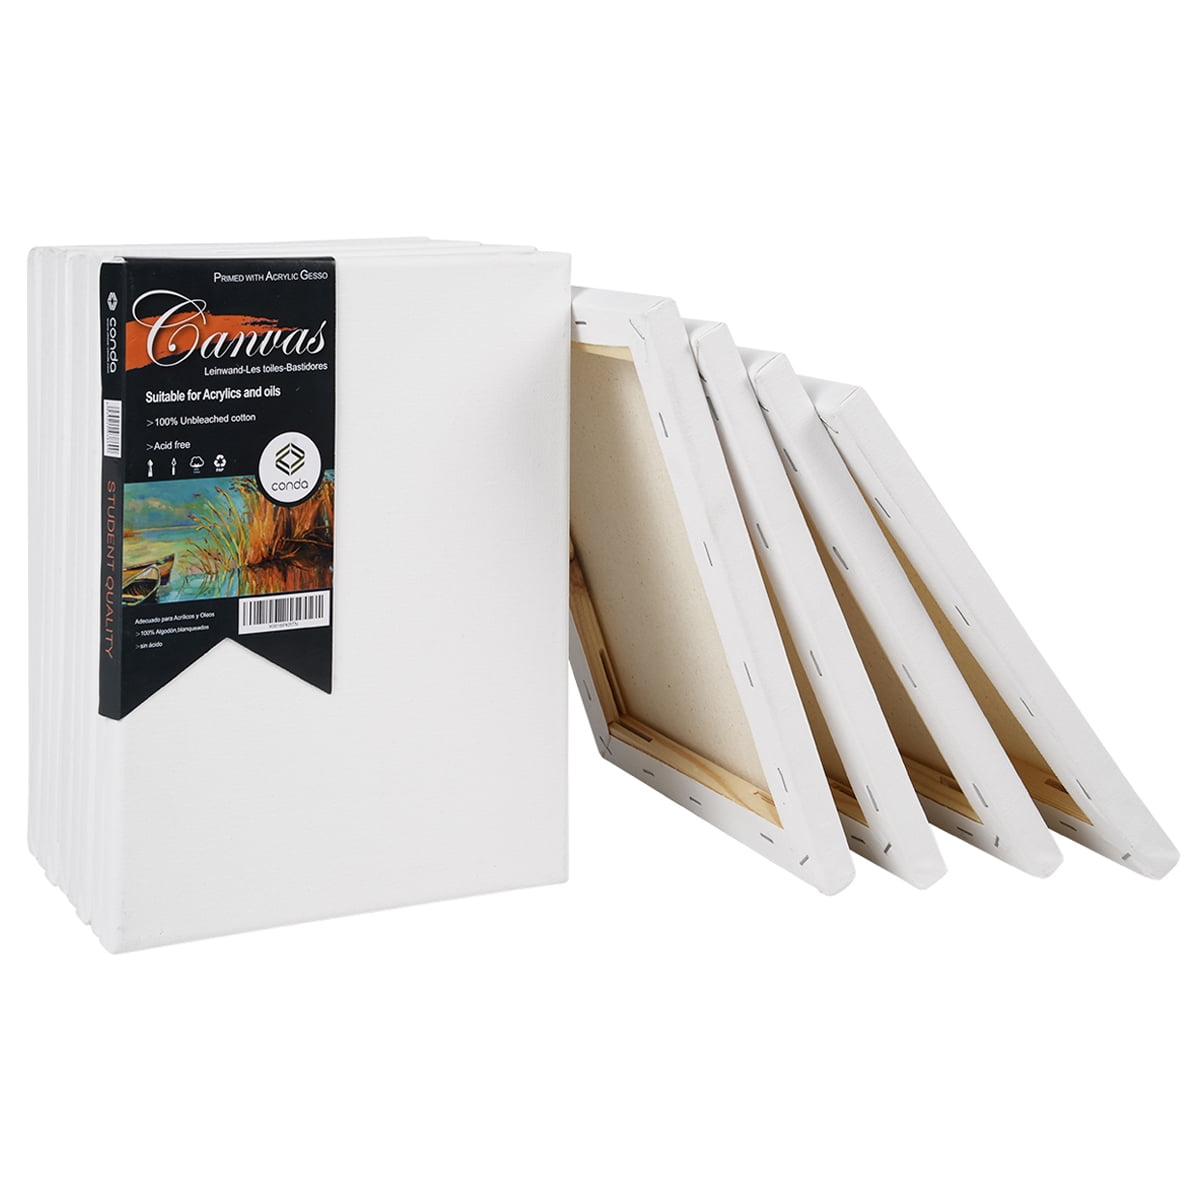 CONDA 5x7 inch Stretched Canvas for Painting, 6 Pack of Canvas, Primed,  100% Cotton 5/8 Inch Profile Value Bulk Pack for Acrylics, Oils Painting